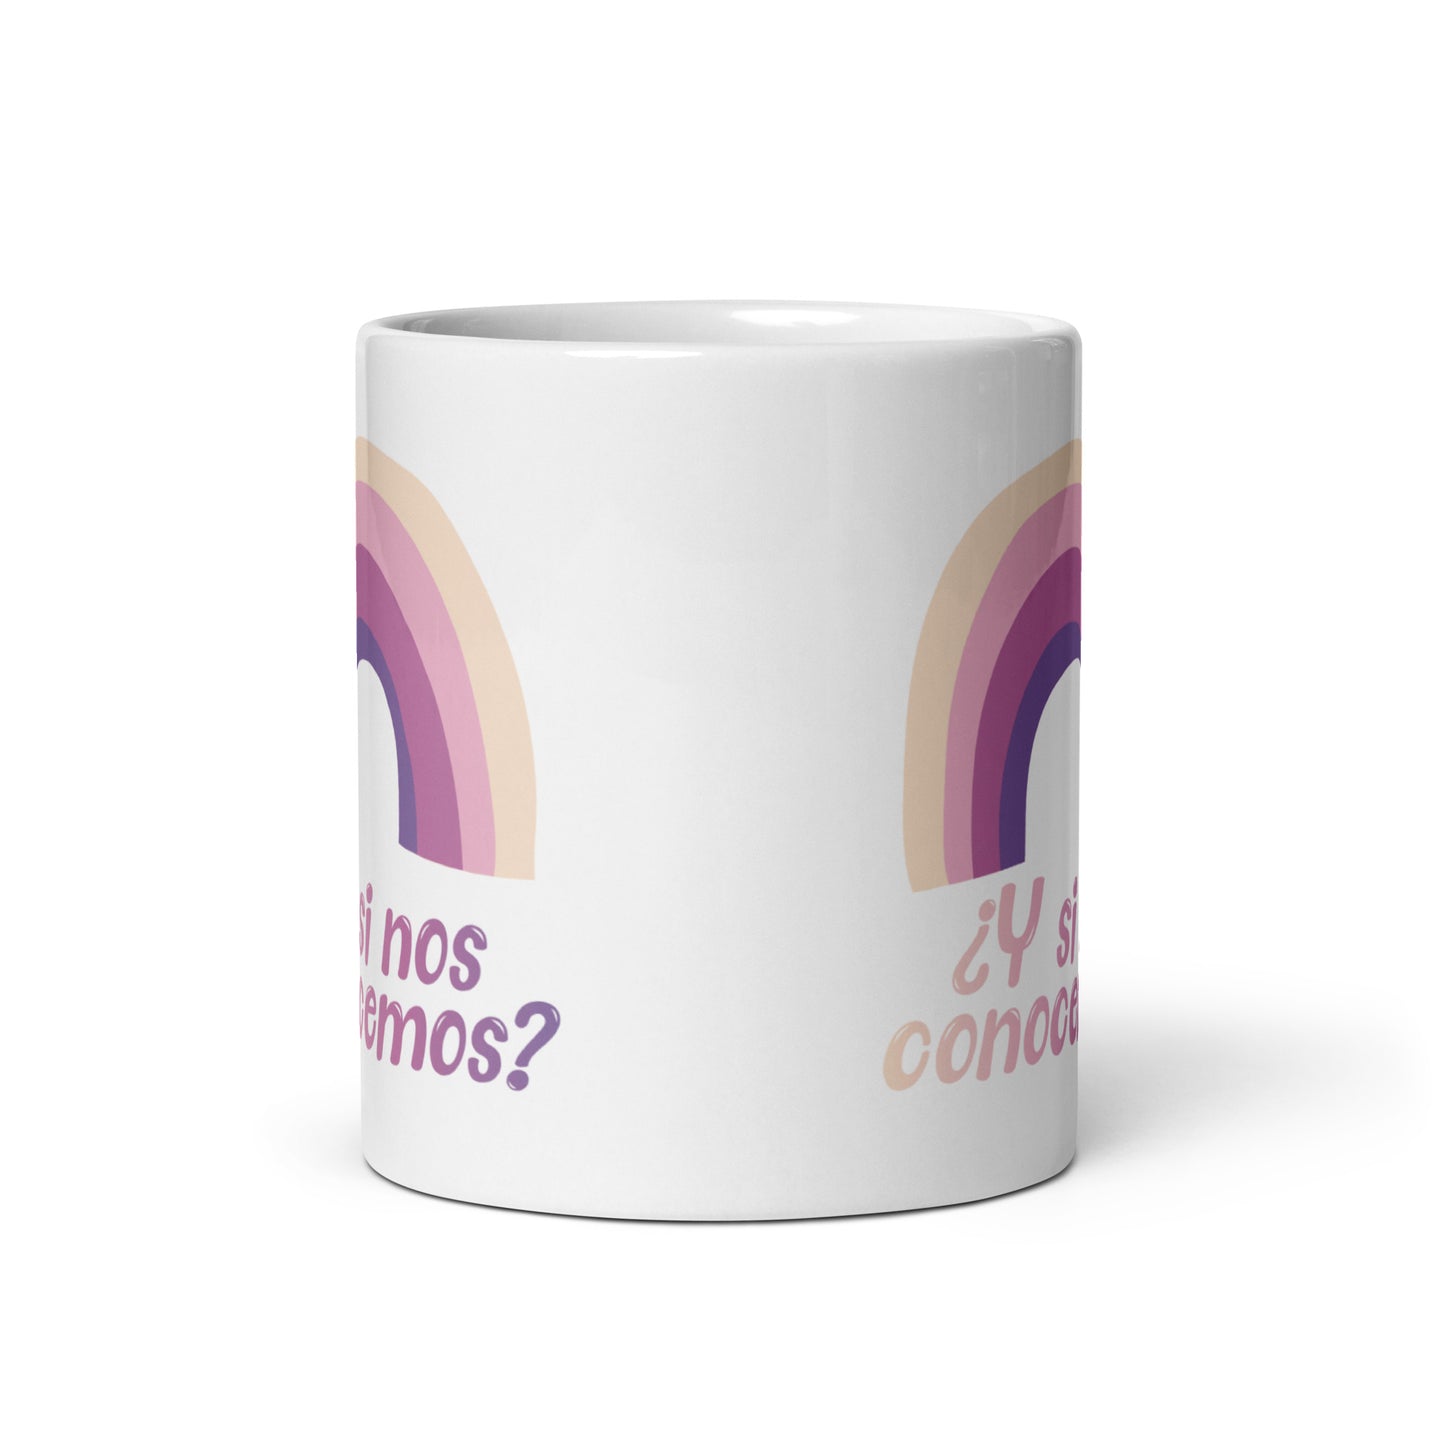 What if we meet? Cup 